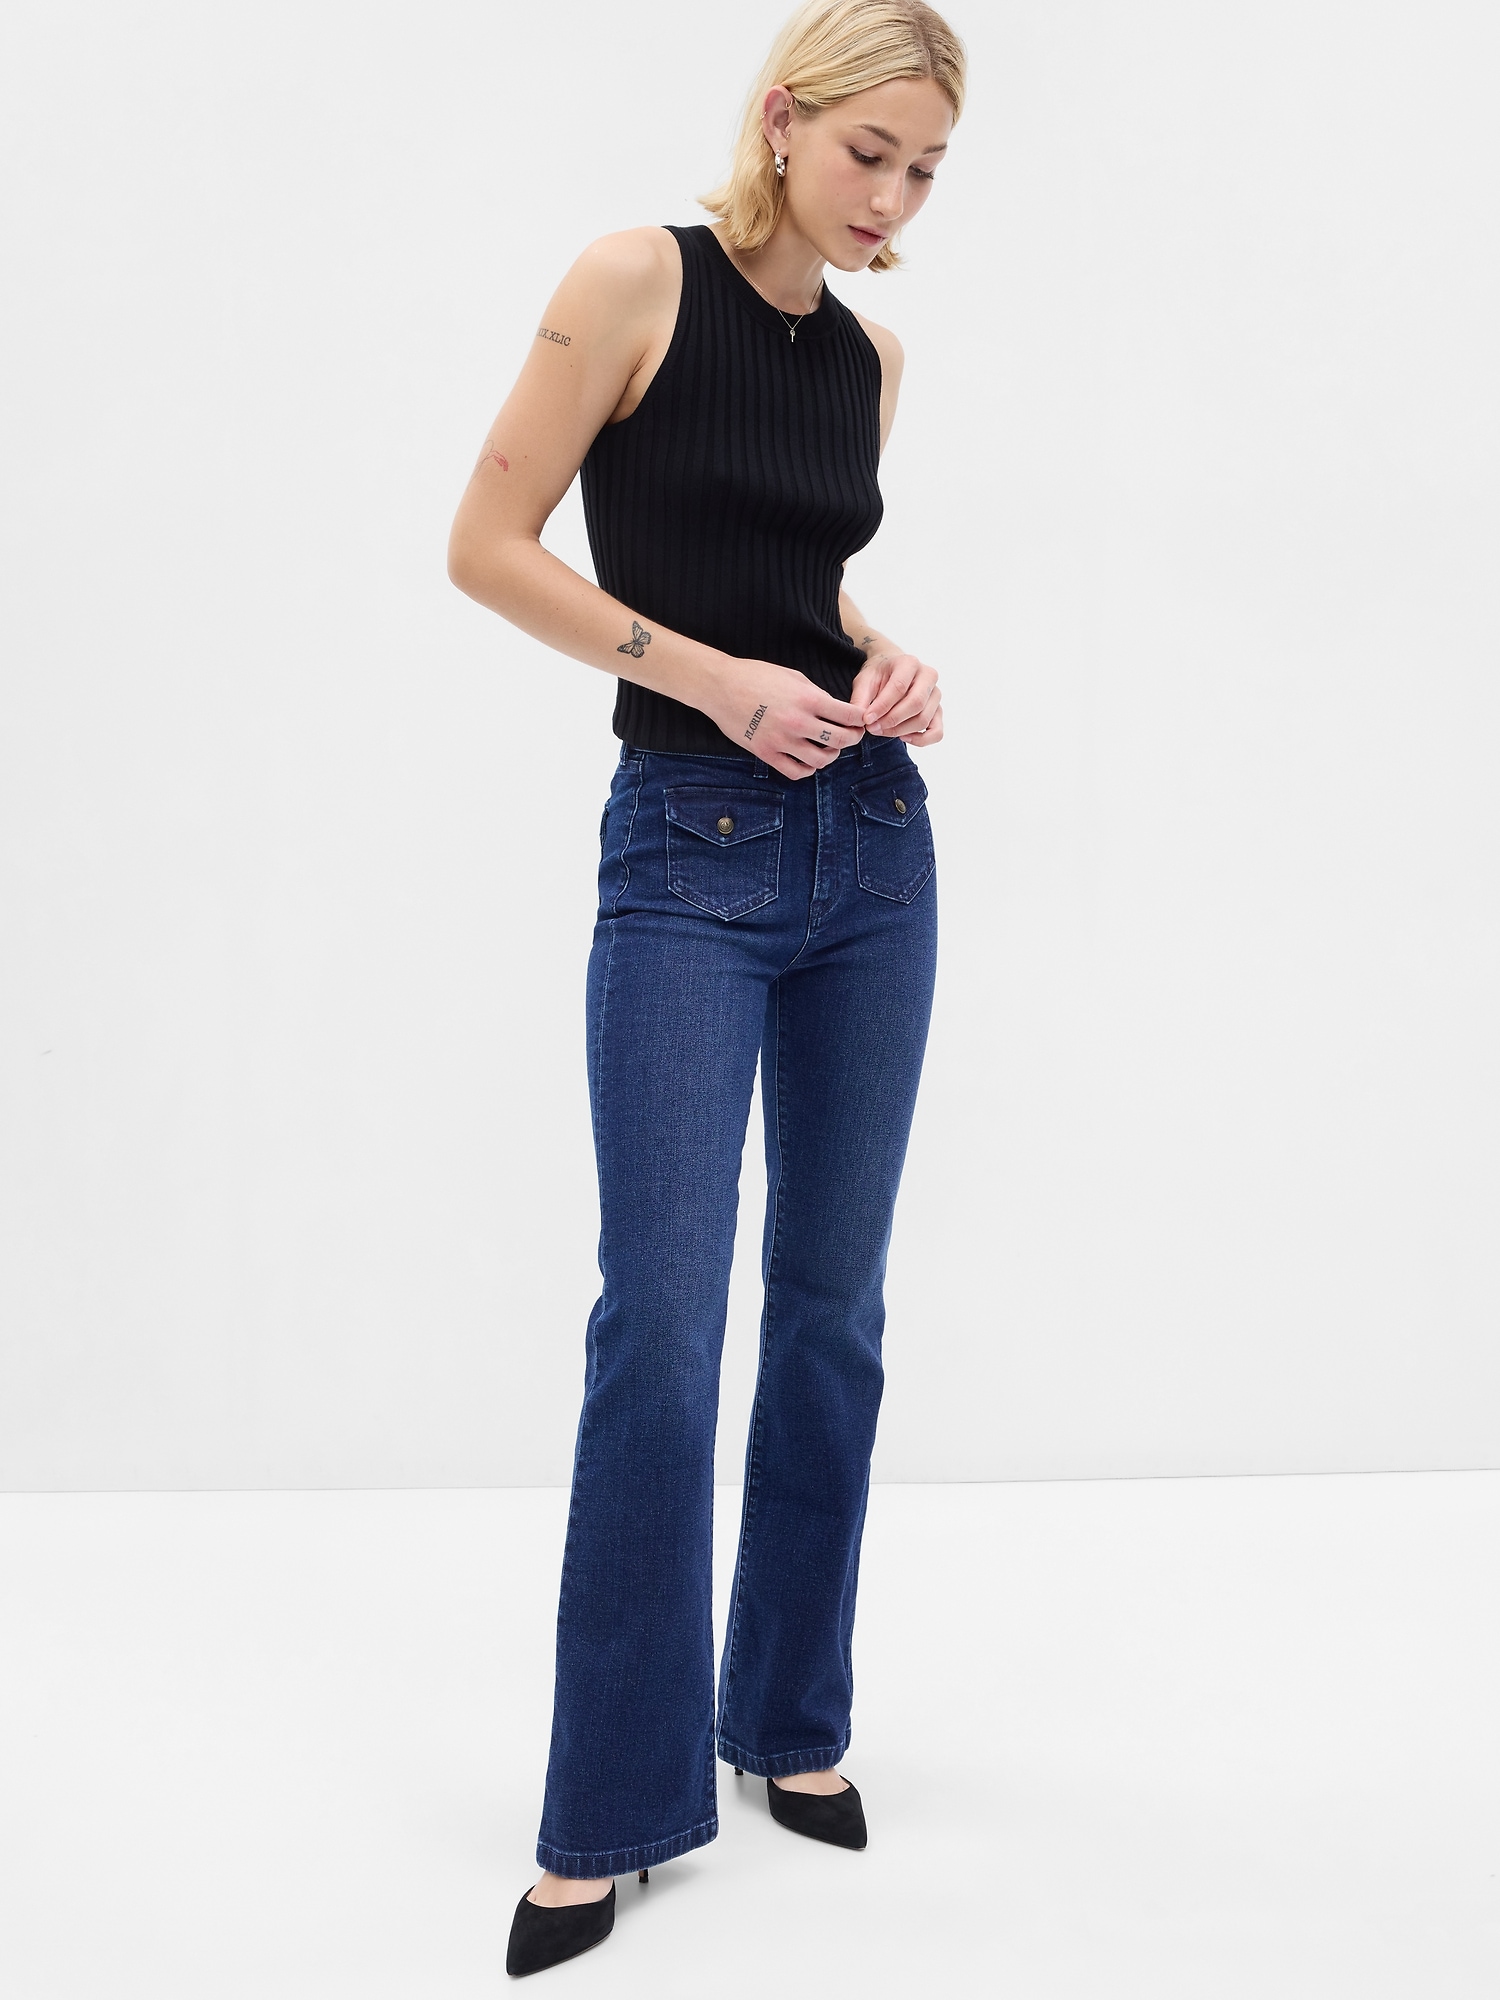 Gap Flare Jeans